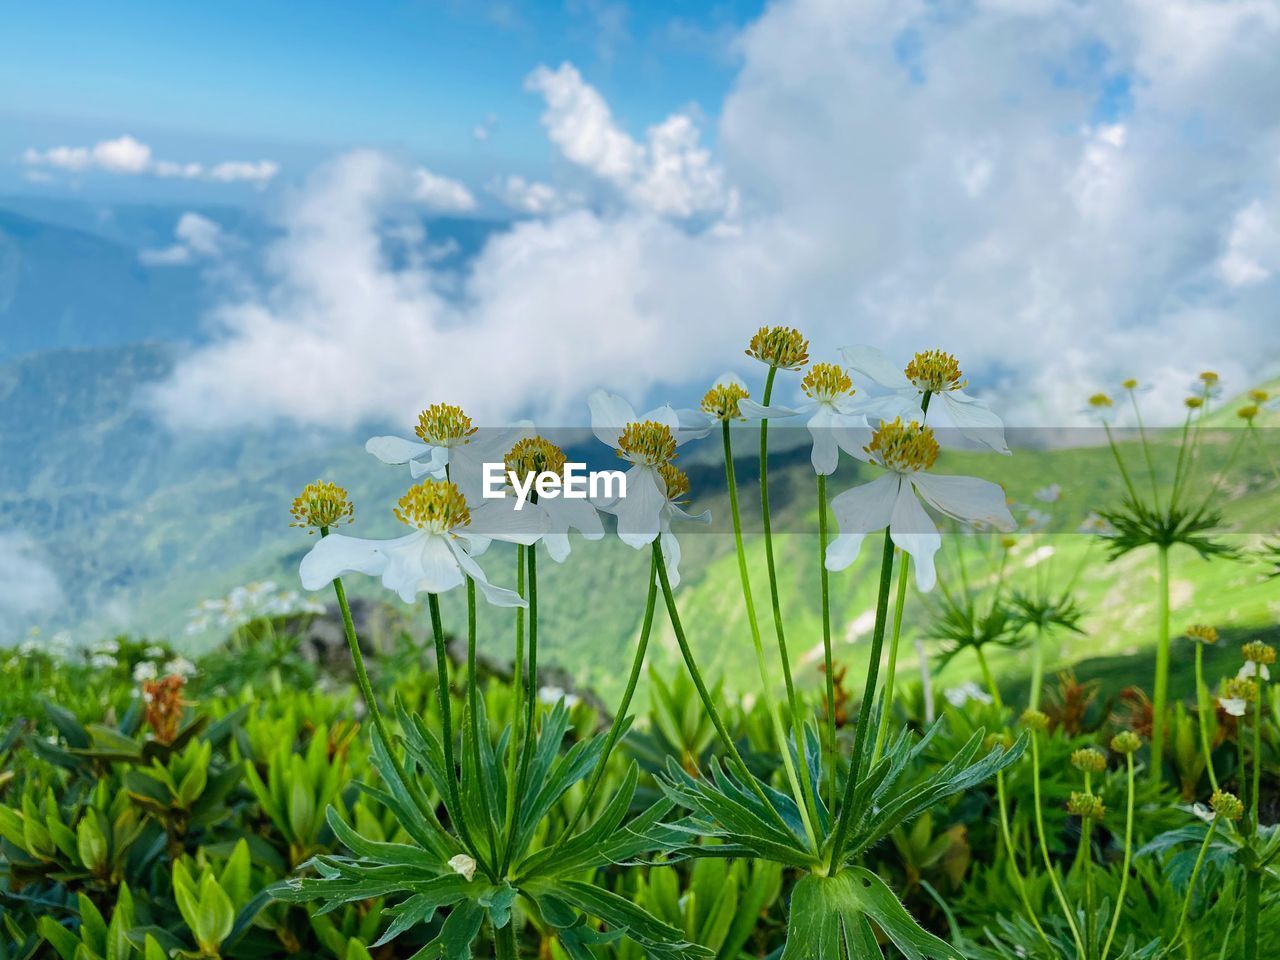 SCENIC VIEW OF FLOWERING PLANT AGAINST SKY